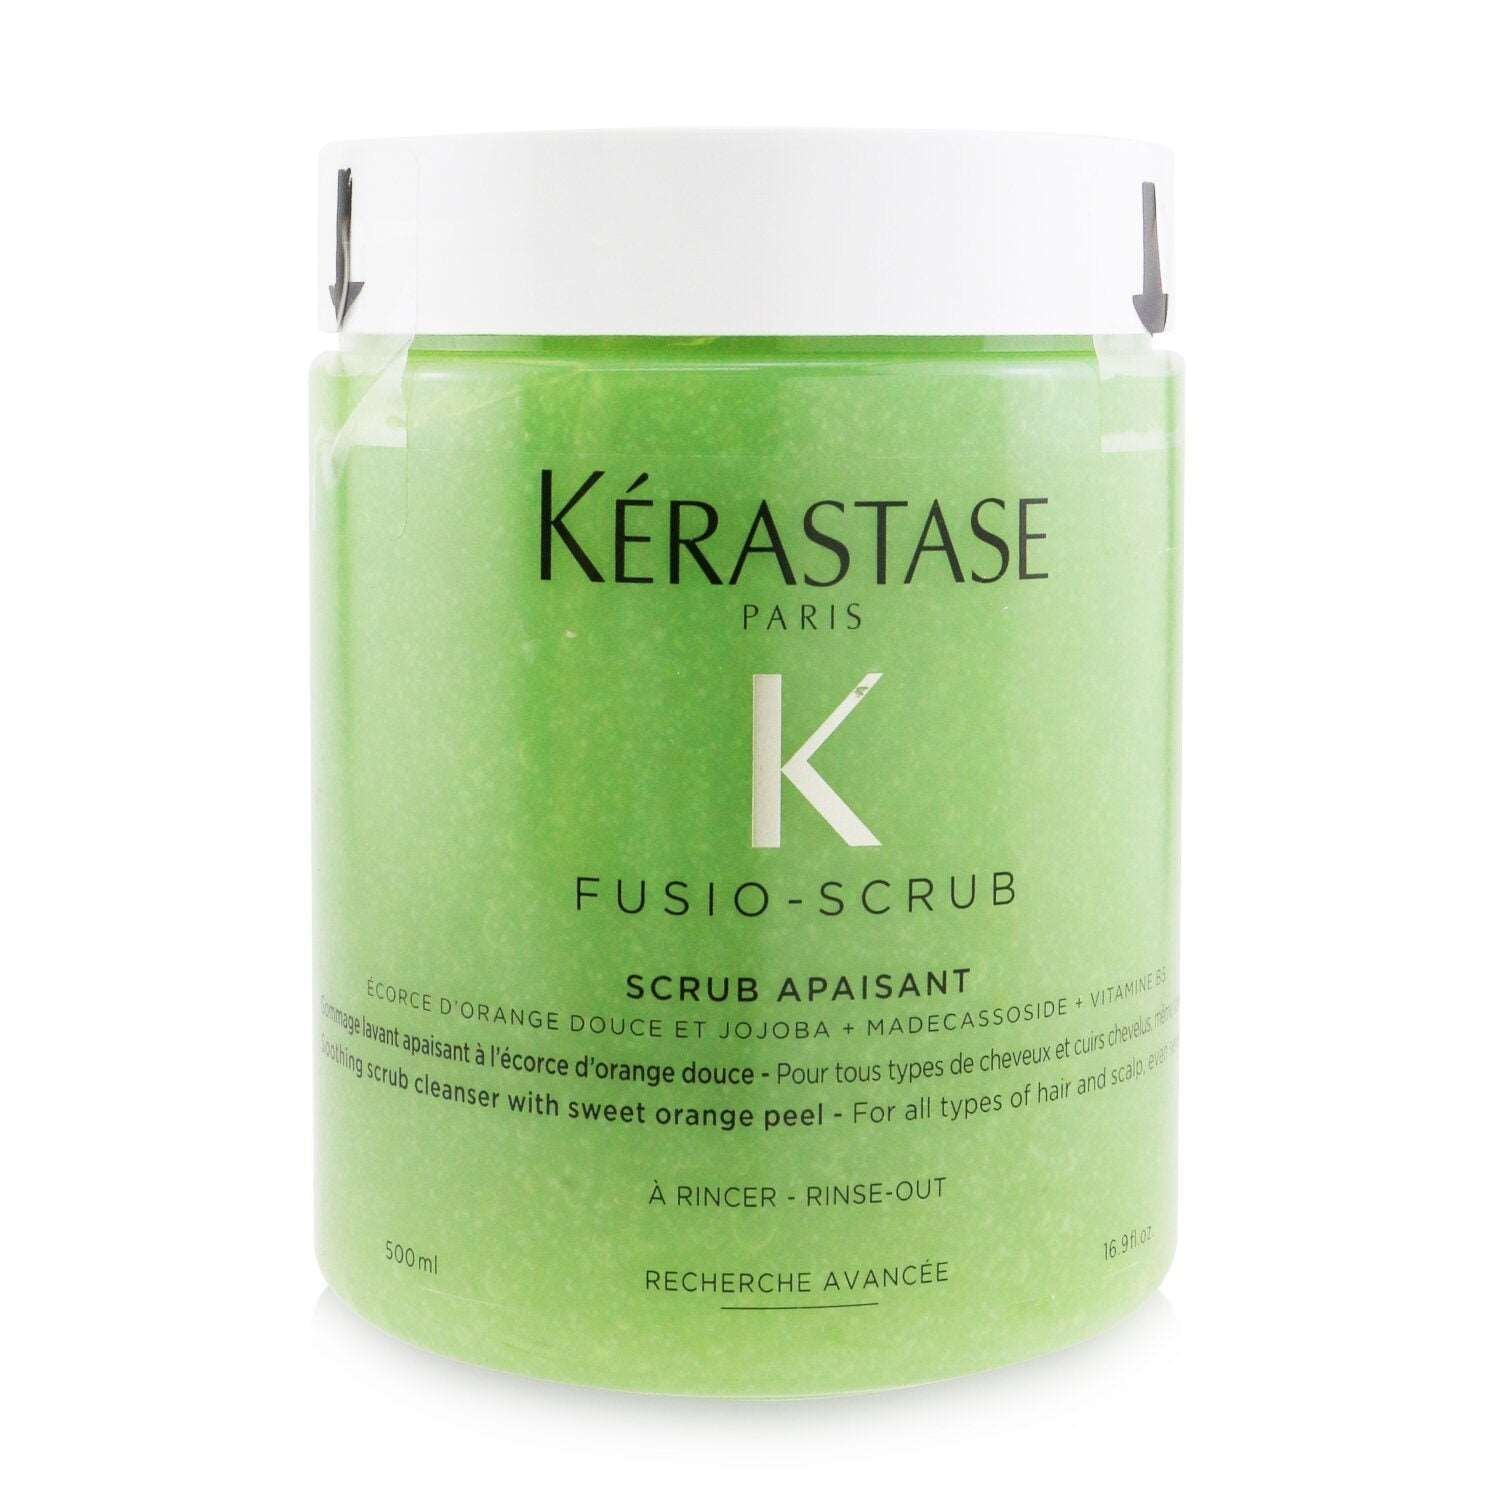 KERASTASE - Fusio-Scrub Scrub Apaisant Soothing Scrub Cleanser with Sweet Orange Peel (For All Types of Hair and Scalp) 500ml/16.9oz 3P's Inclusive Beauty